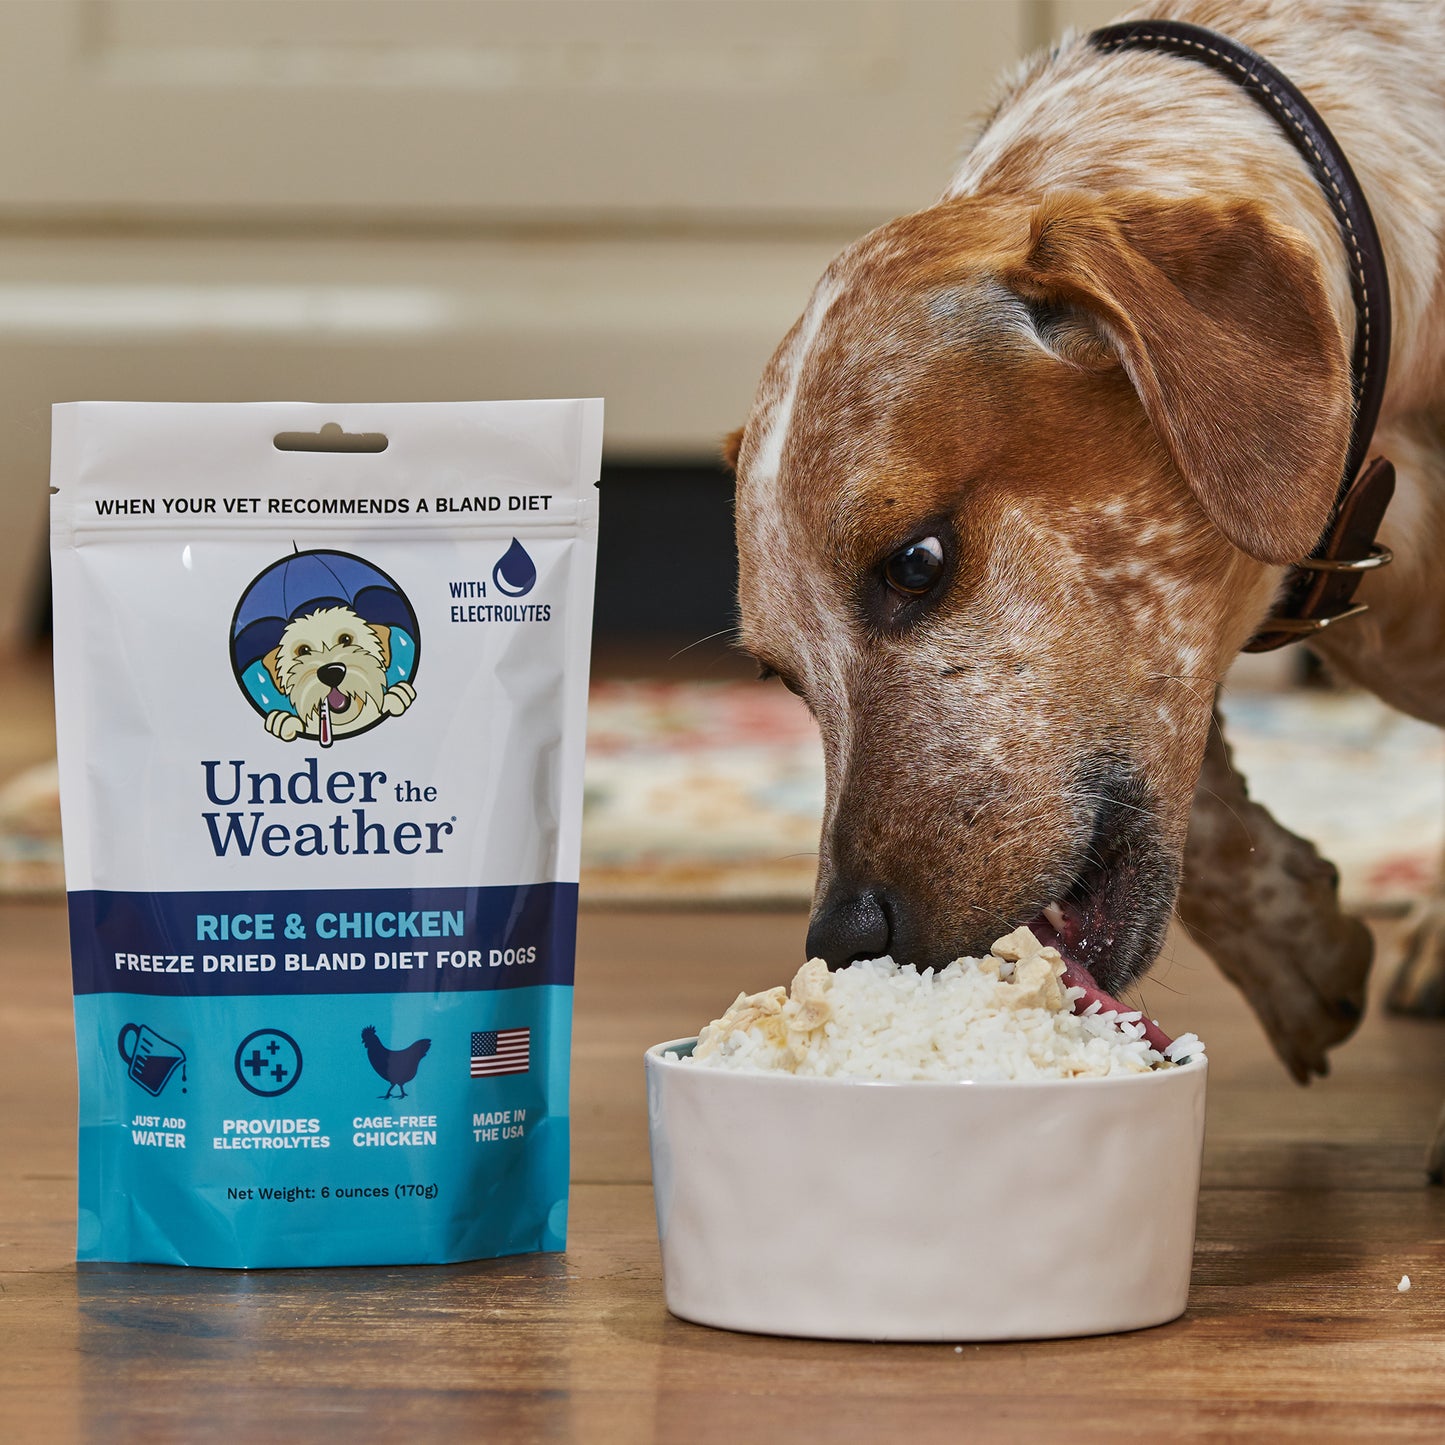 Chicken & Rice Bland Diet For Dogs - 4 Pack